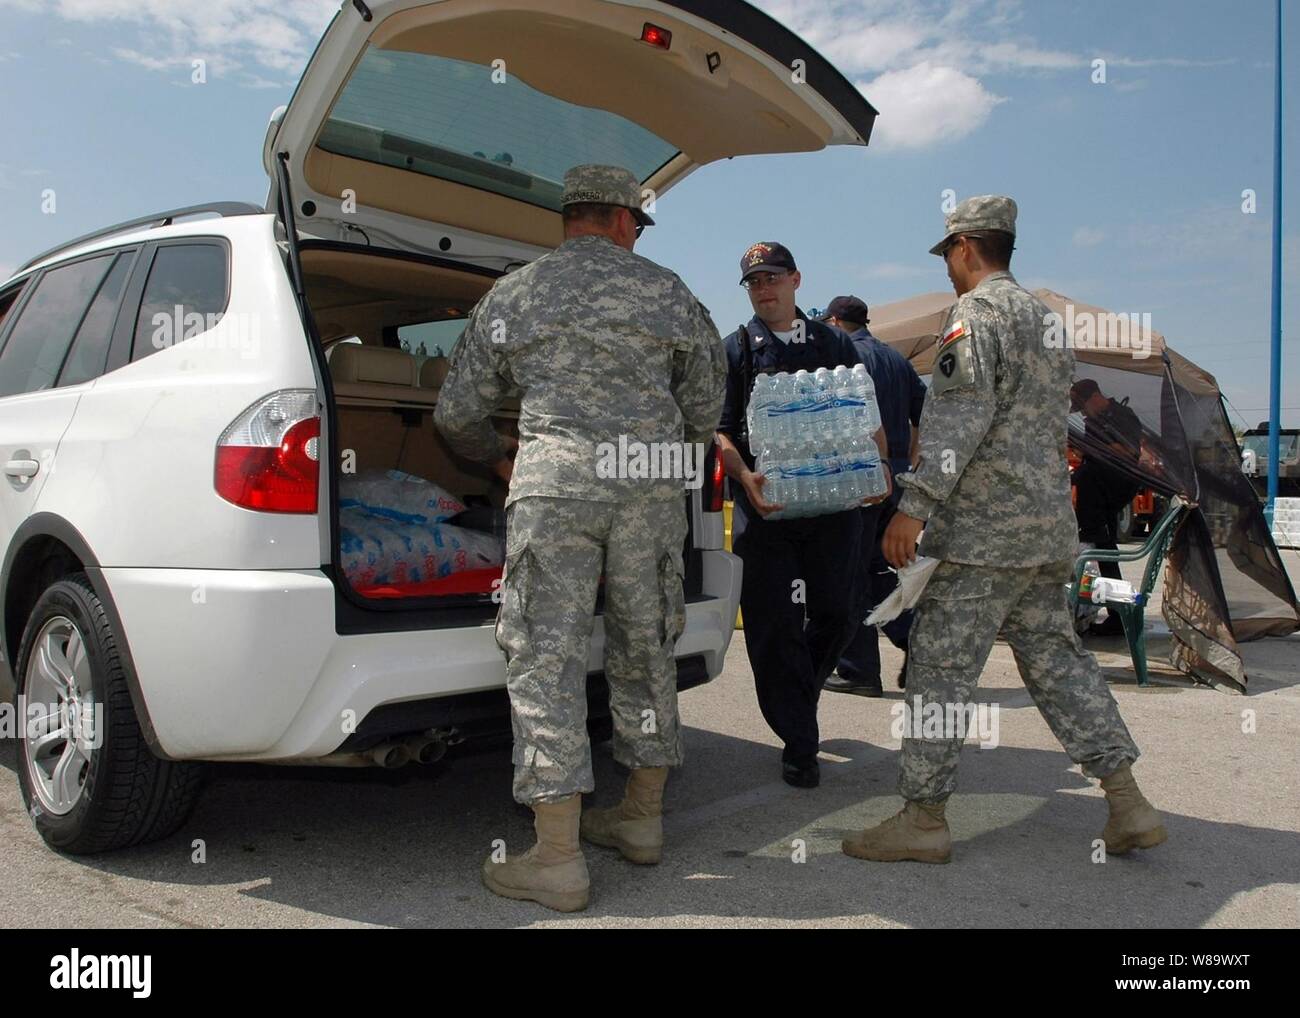 U.S. Navy Petty Officer 1st Class Roberto Diesta, assigned to the amphibious assault ship USS Nassau (LHA 4), and soldiers from the Texas Army National Guard load ice into a resident's vehicle during a disaster response mission in Galveston, Texas, on Sept. 18, 2008.  The Nassau is anchored off the coast of Galveston, Texas, to render assistance to other military organizations and civil authorities deployed in support of Hurricane Ike disaster relief efforts. Stock Photo